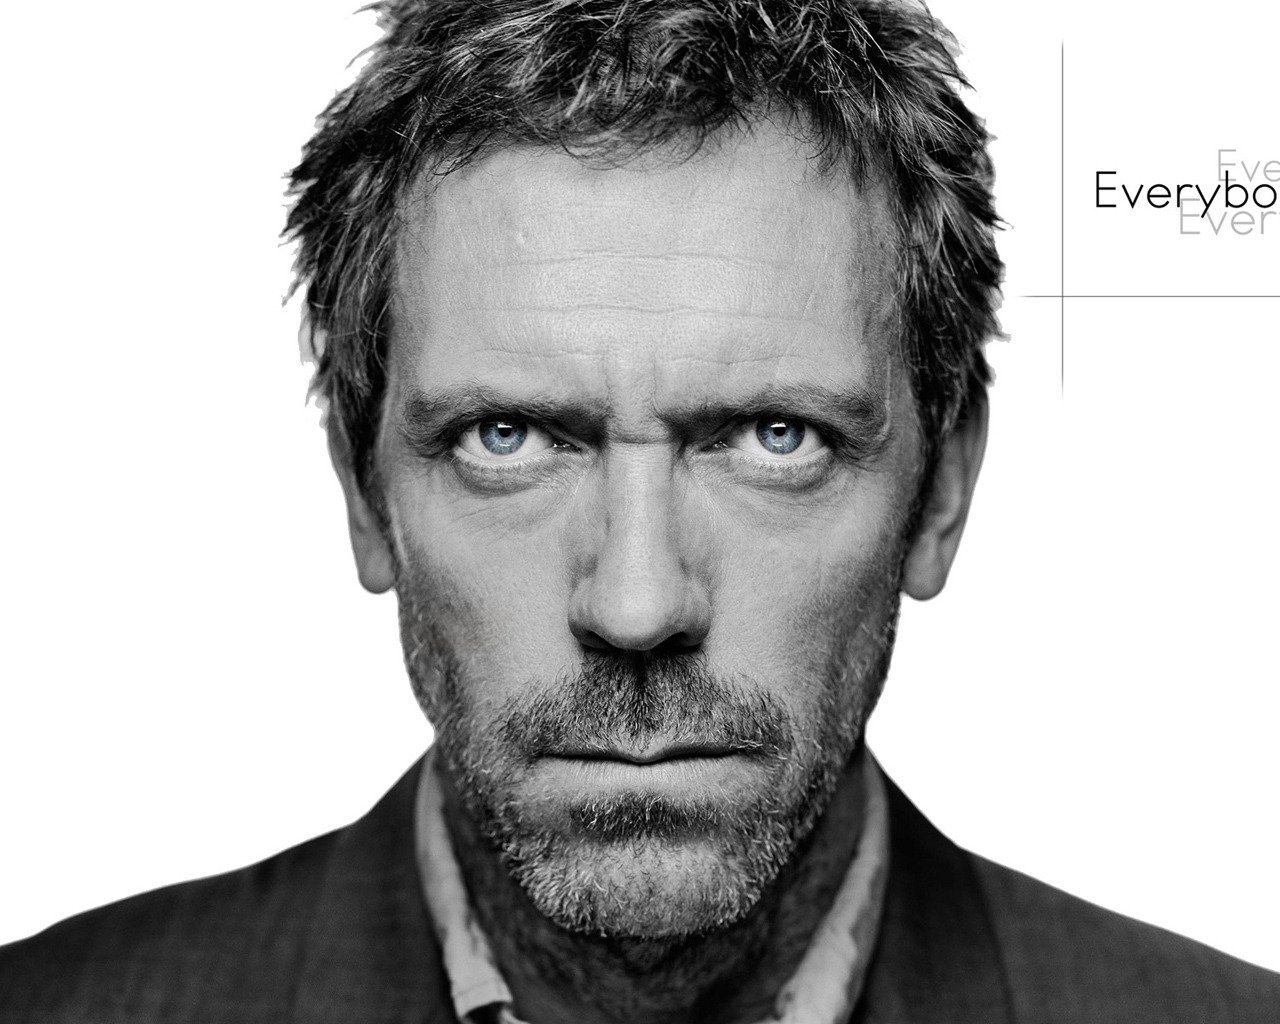 Dr House for 1280 x 1024 resolution